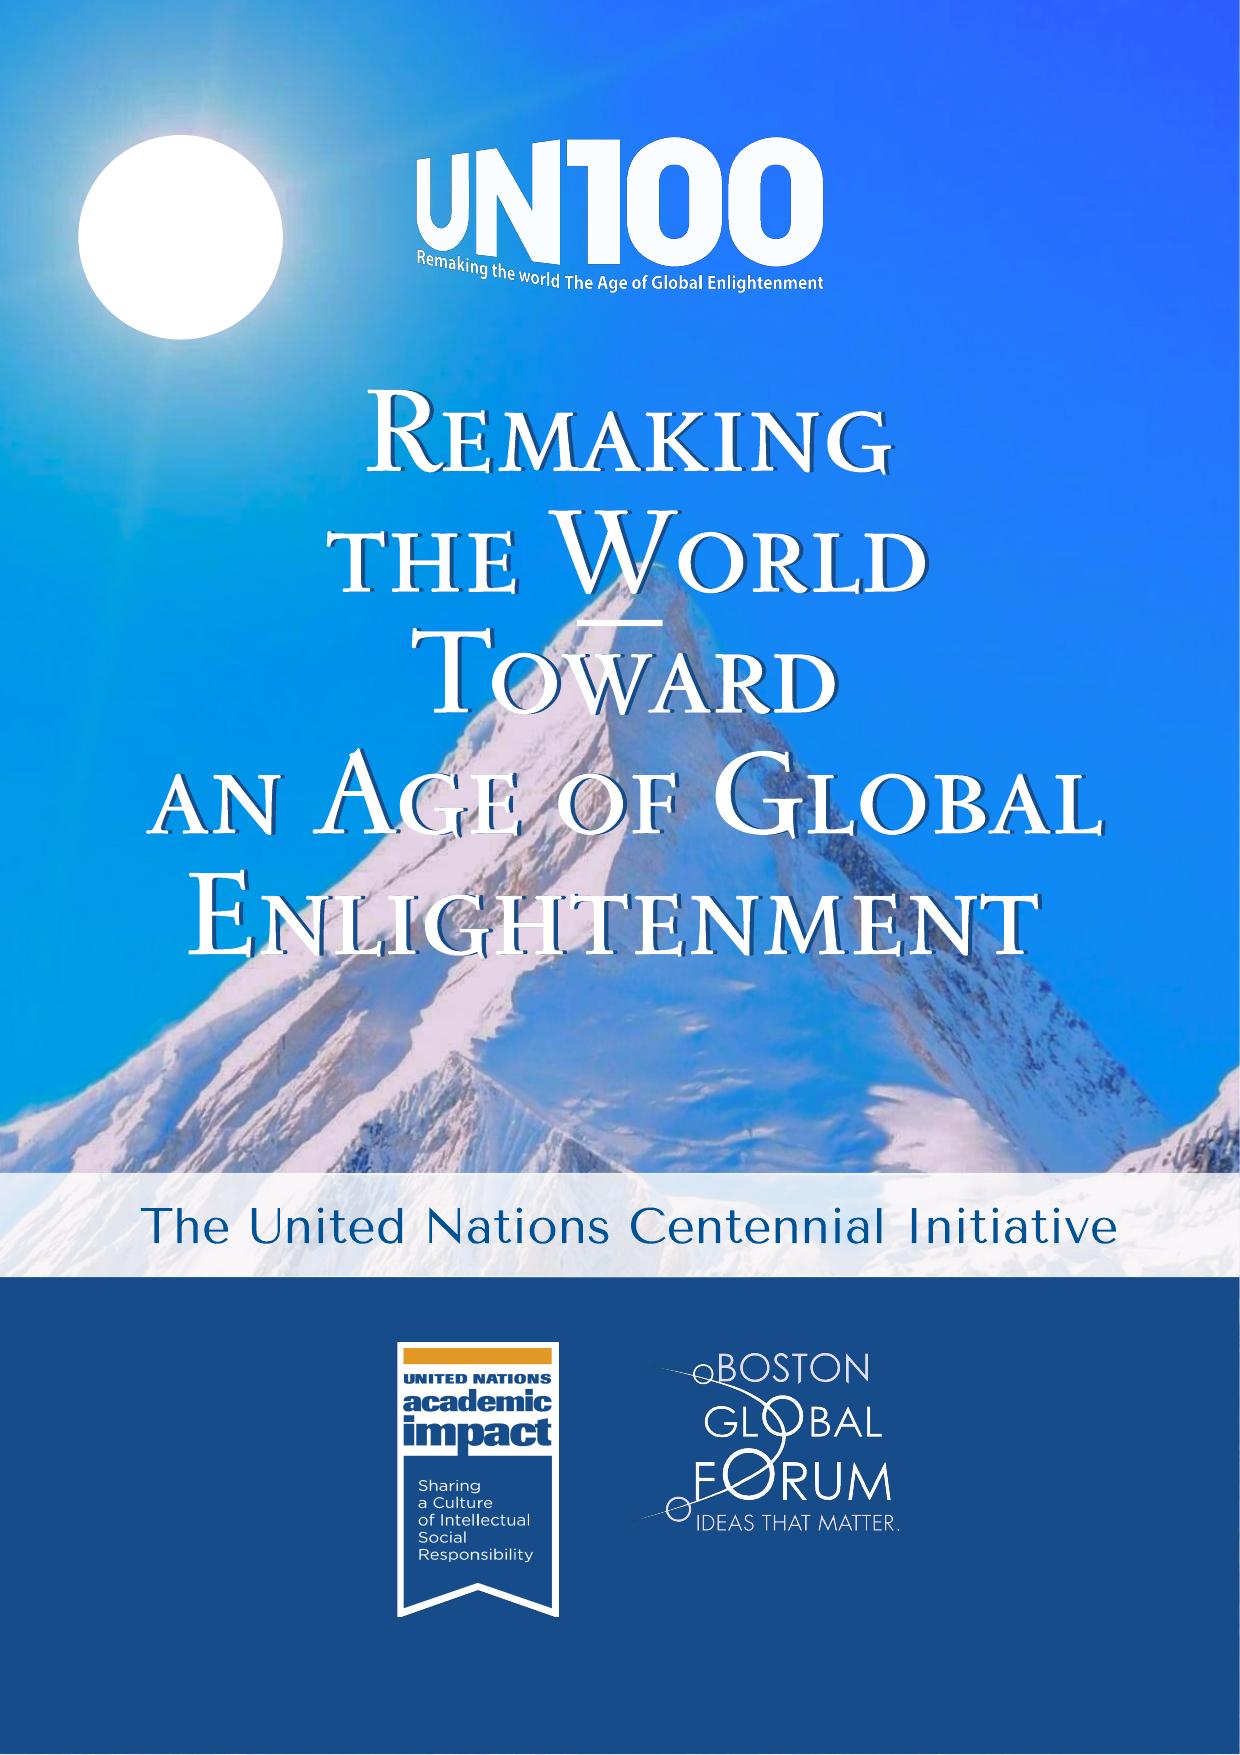 UN100 - Remaking the World Toward an Age of Global Enlightenment